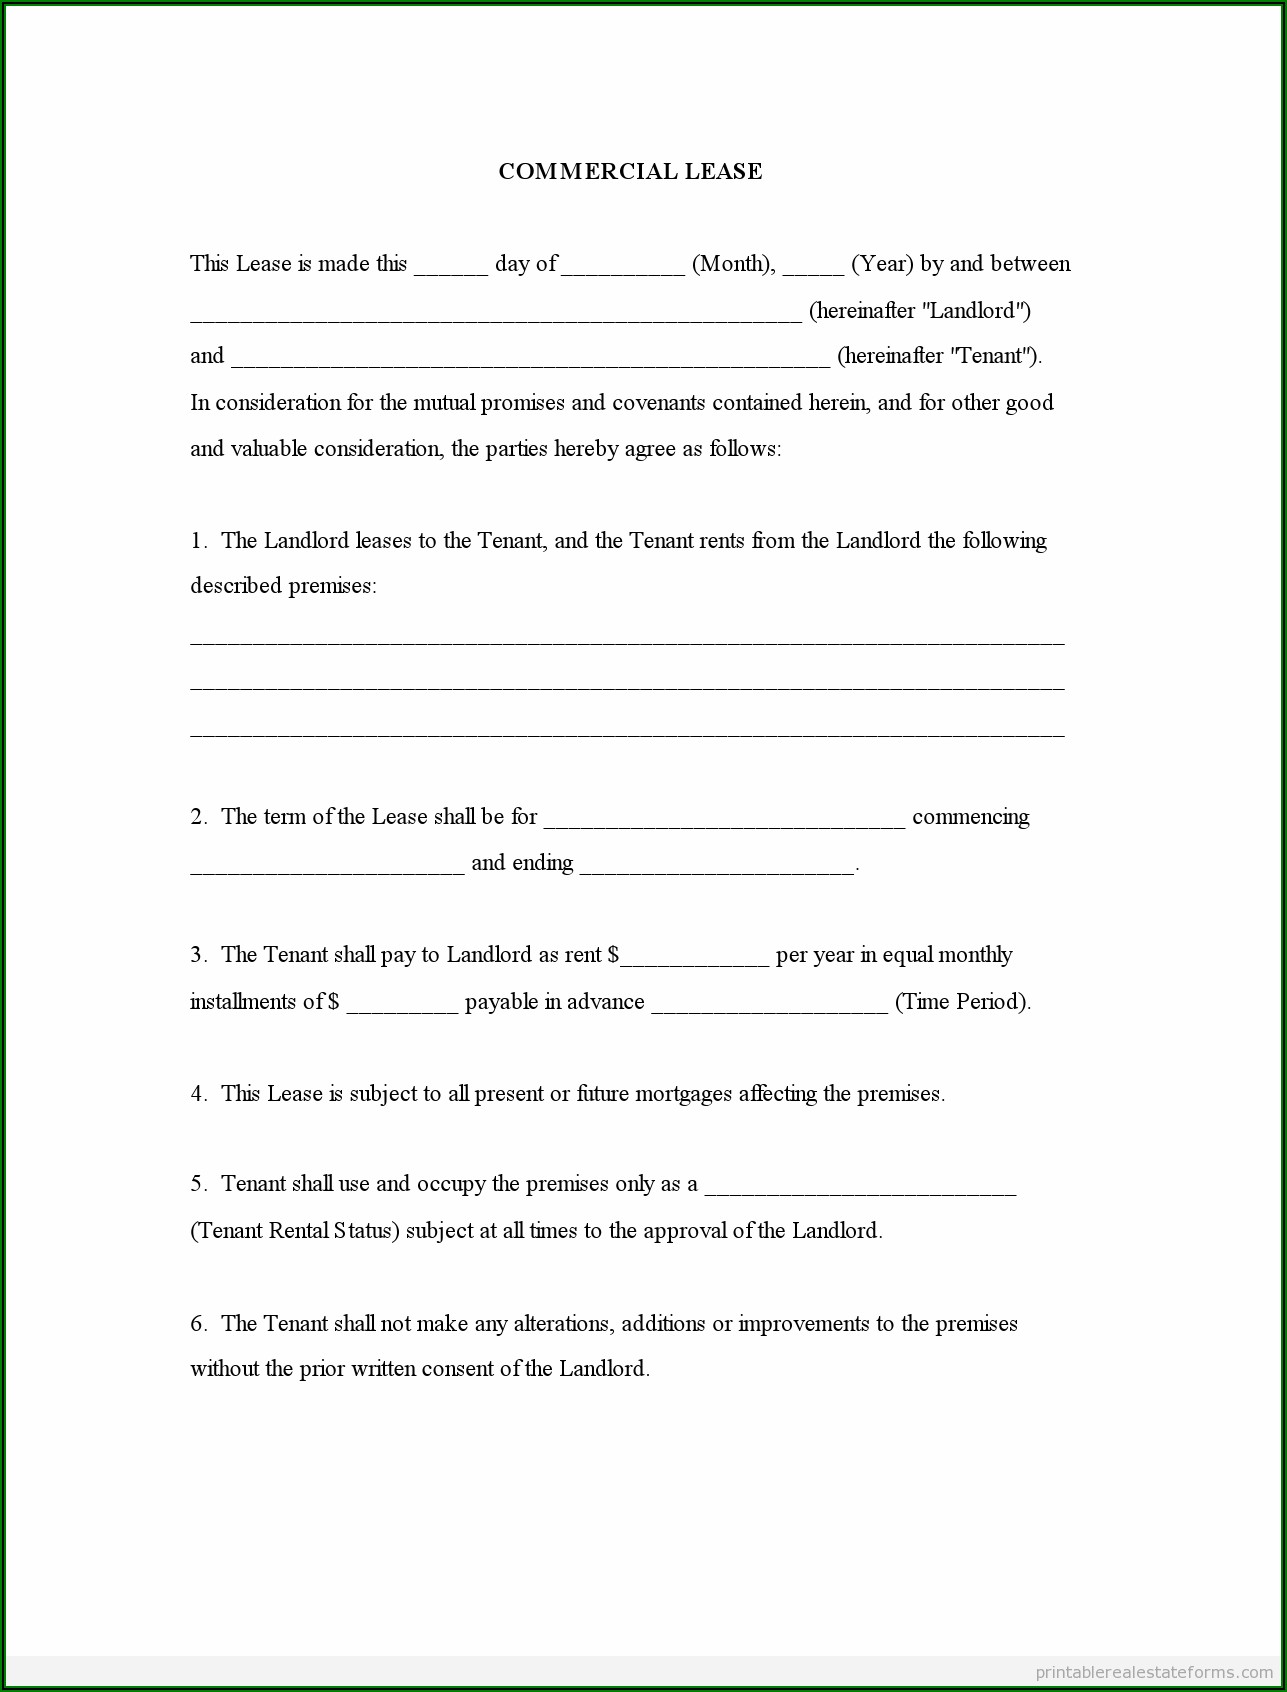 Real Estate Lease Agreement Forms Free